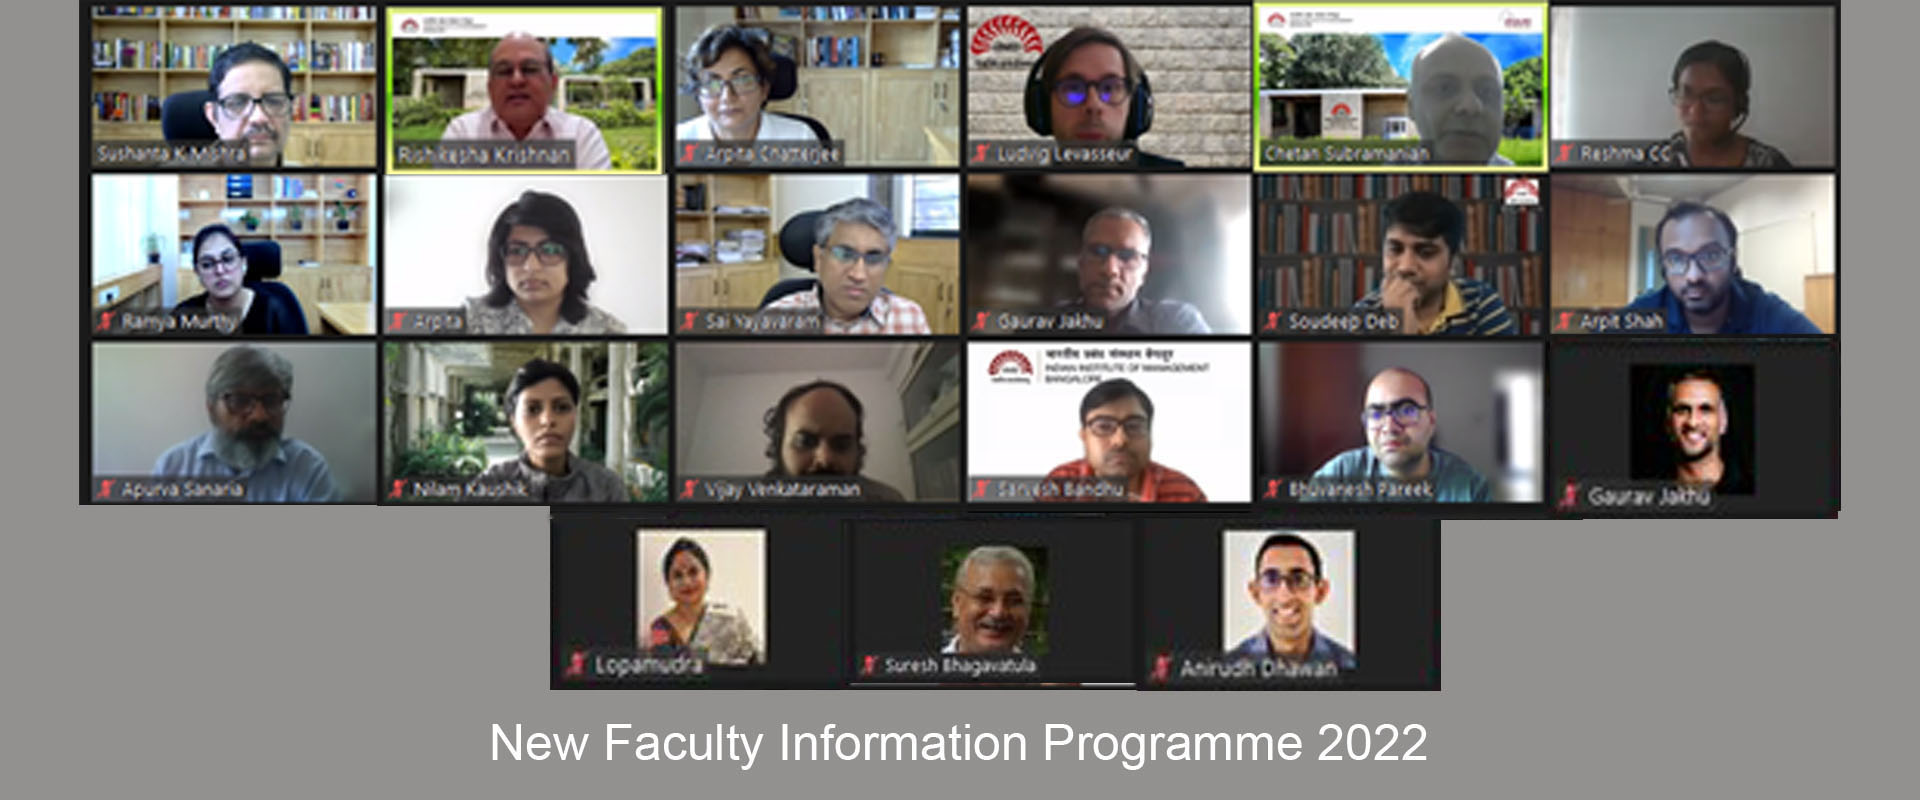 New Faculty Information Programme 2022